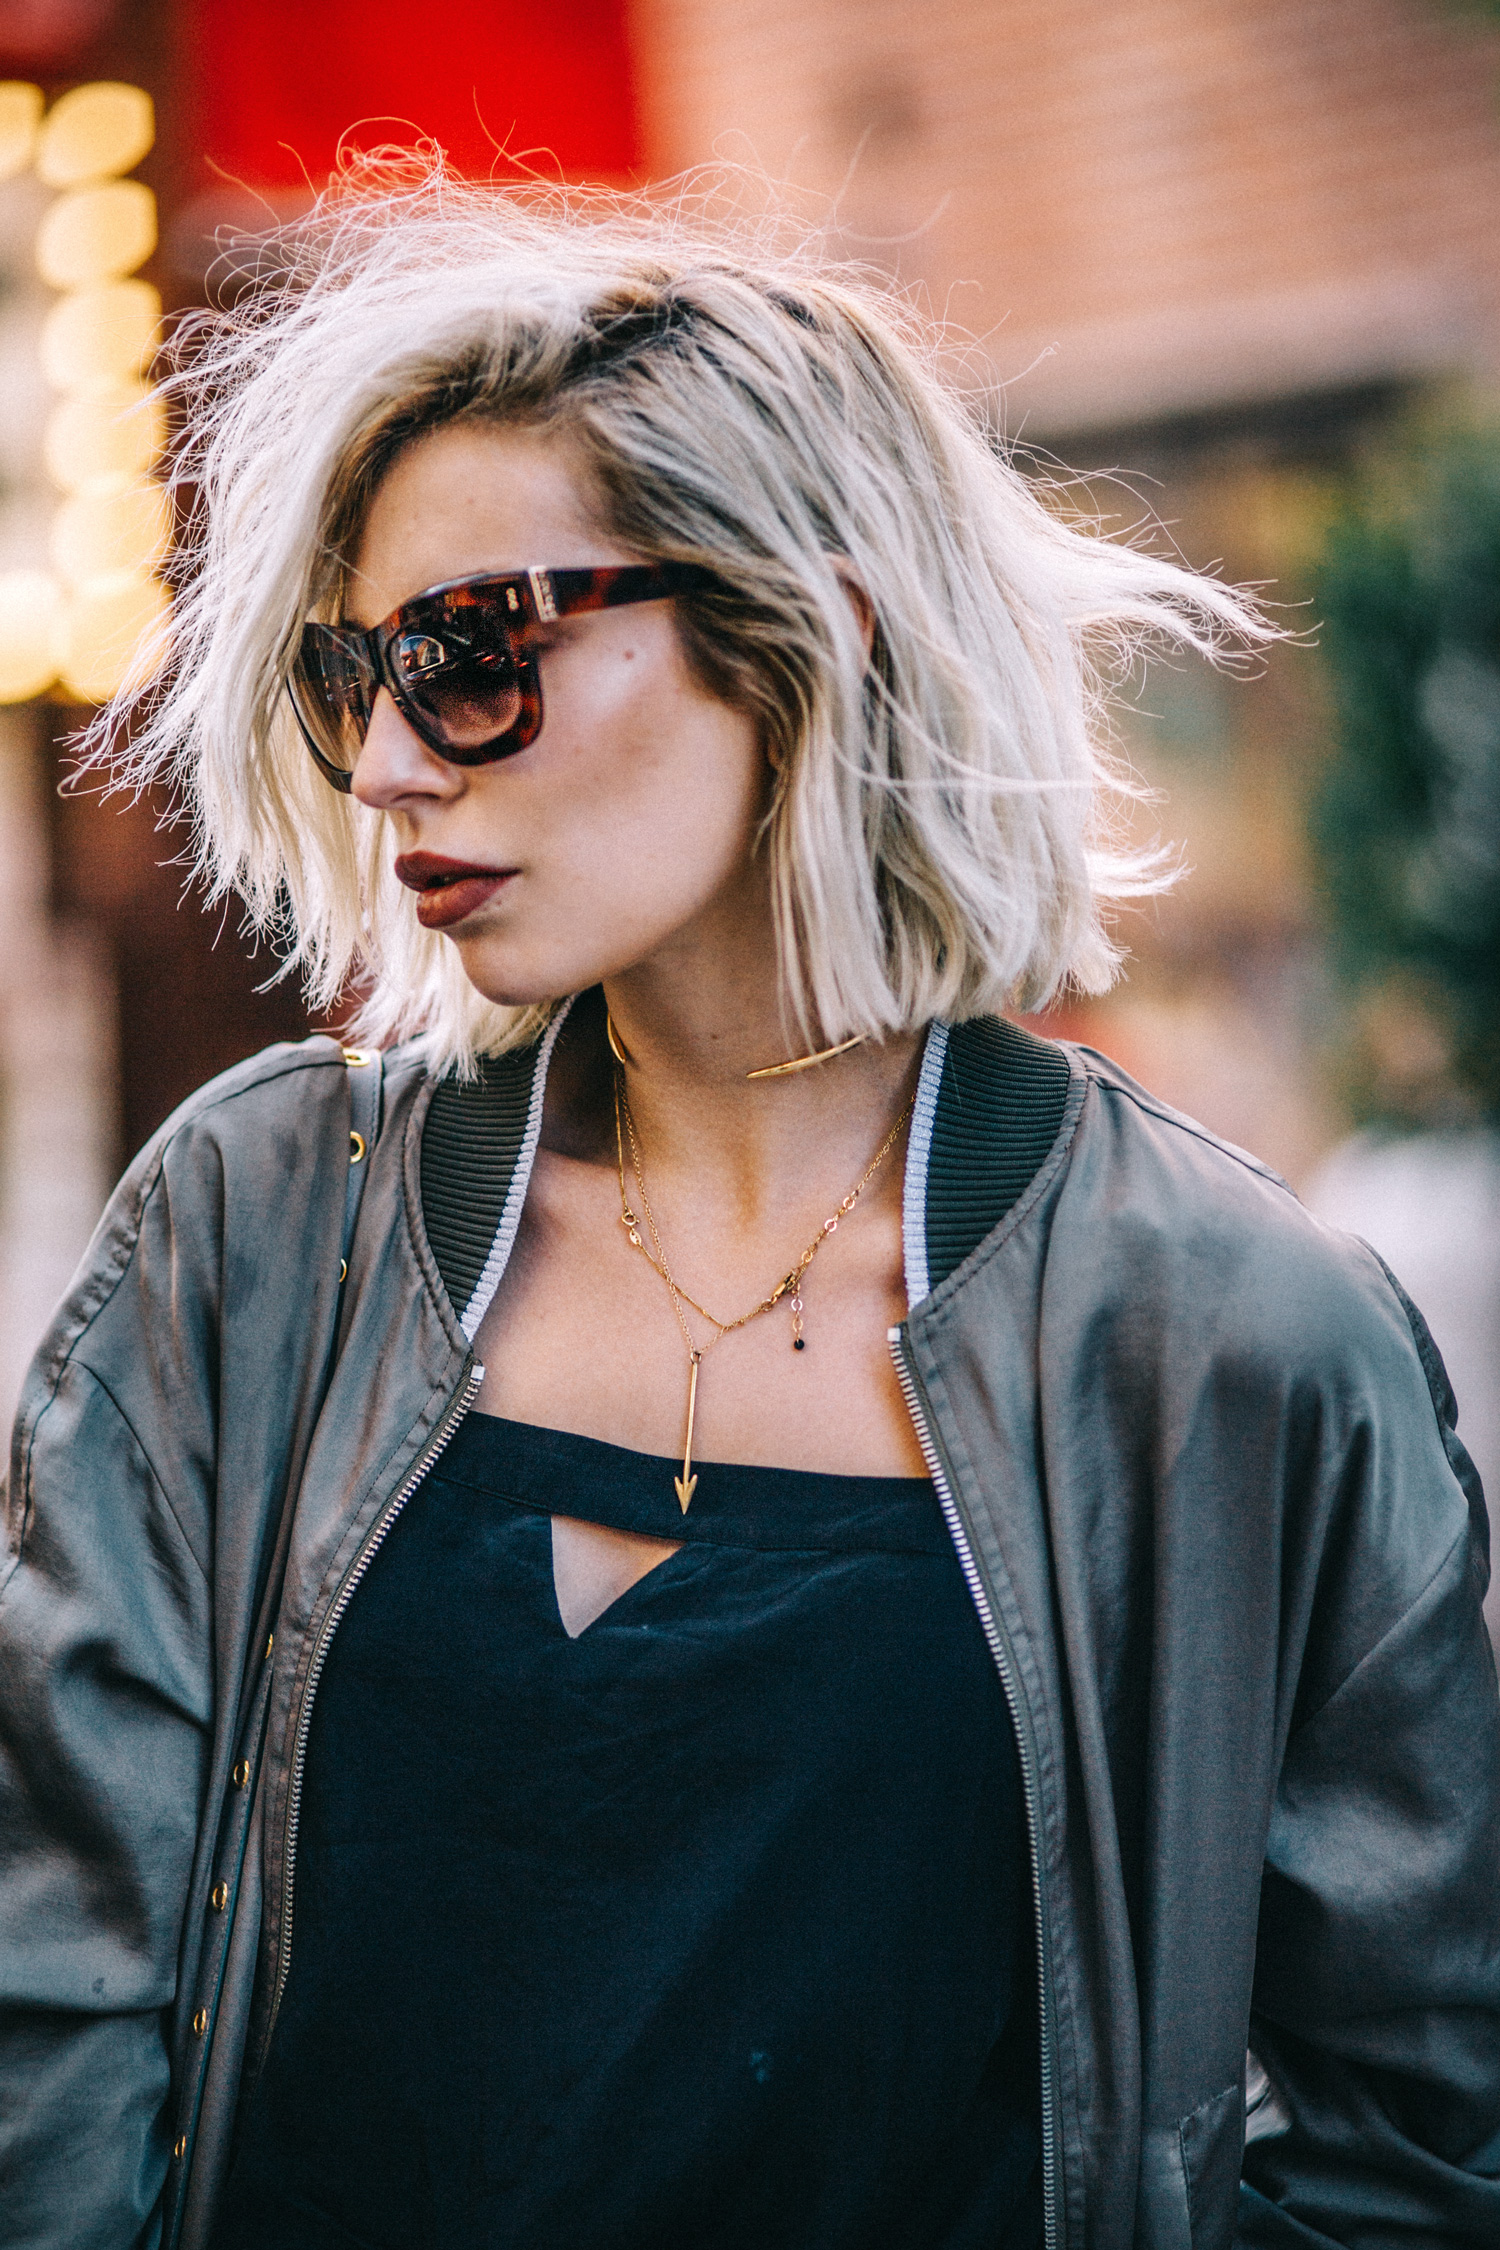 Chinatown in San Francisco | view more pictures on my blog | casual city style | Pinko bomber jacket, Filippa K. top, Nixon watch, Escada sunnies, Asos distressed grey jeans | fashion blogger | 